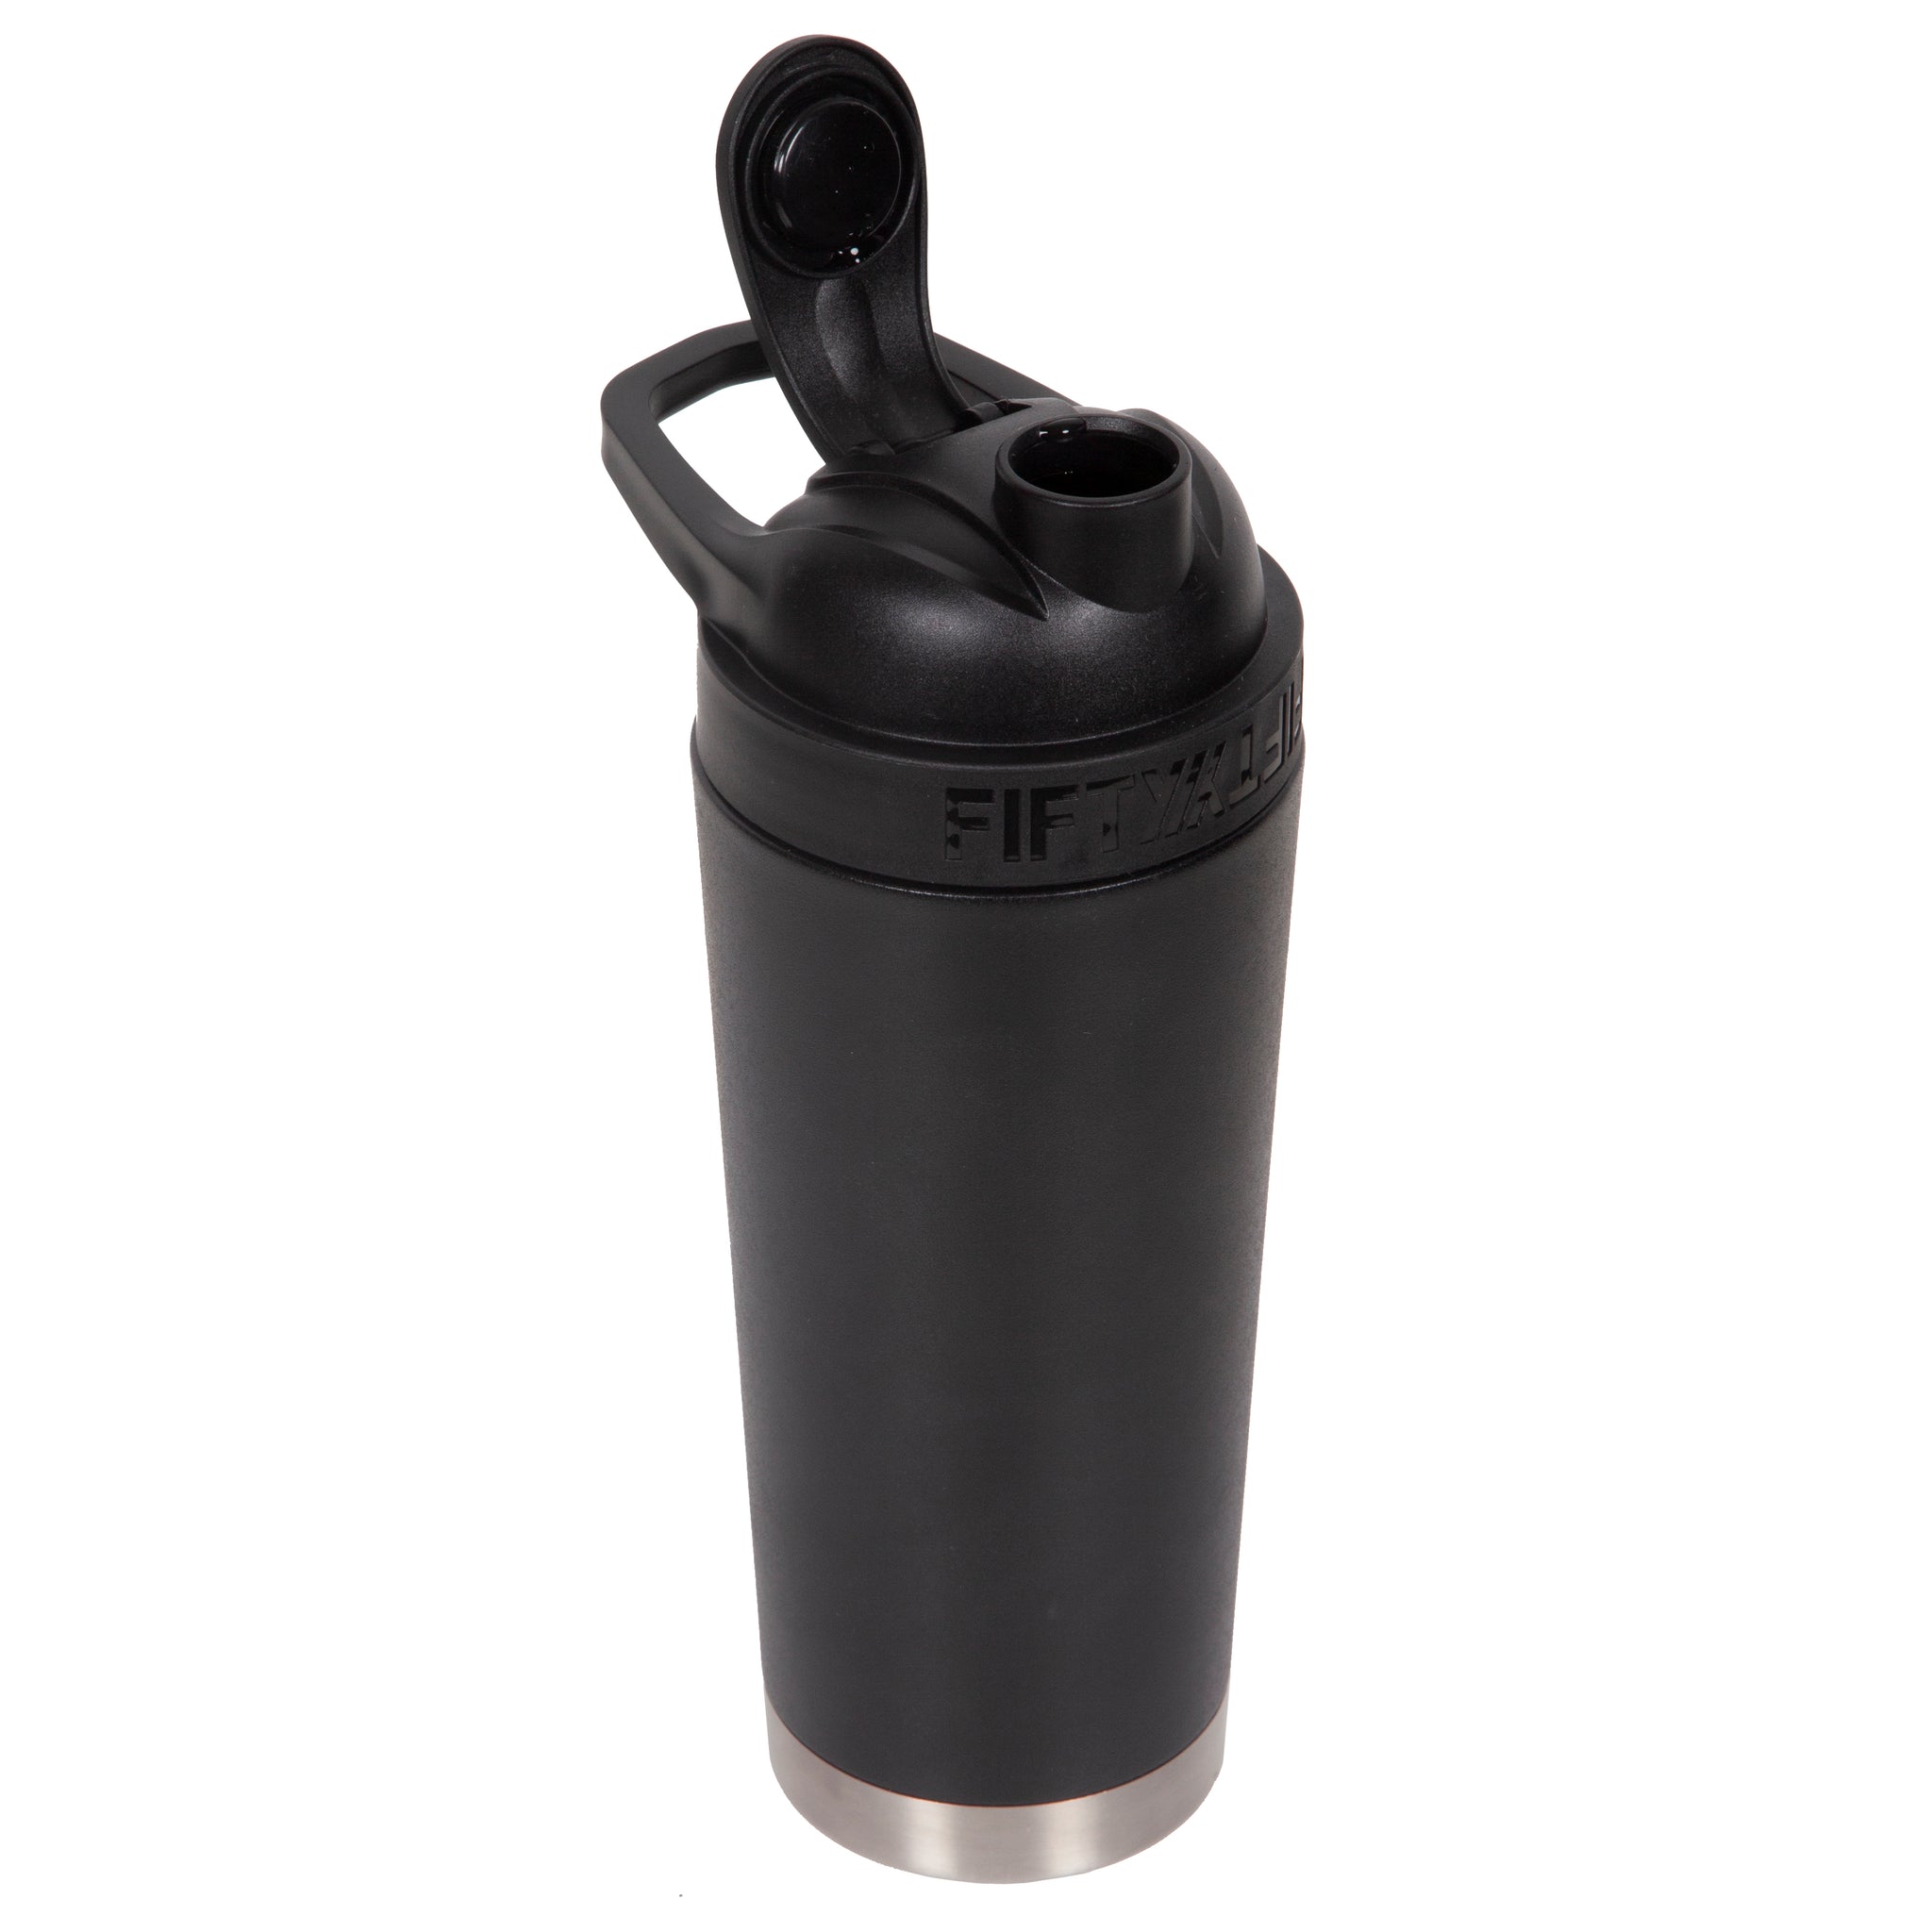 Do You Really Need A Protein Shaker Bottle?